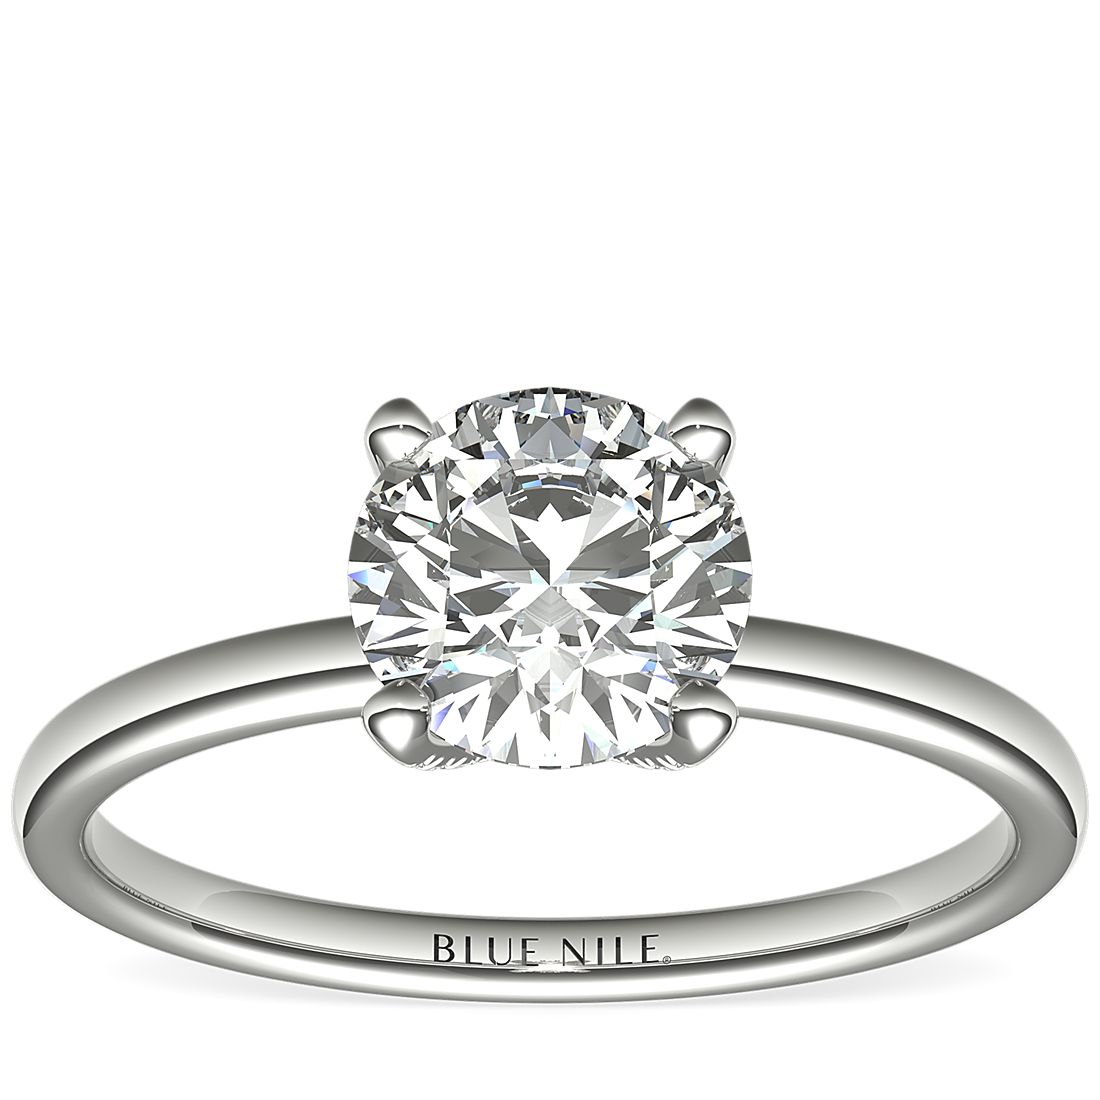 Blue Nile Studio French PavÃ© Diamond Crown Solitaire Engagement Ring in Platinum (1/6 ct. tw.)